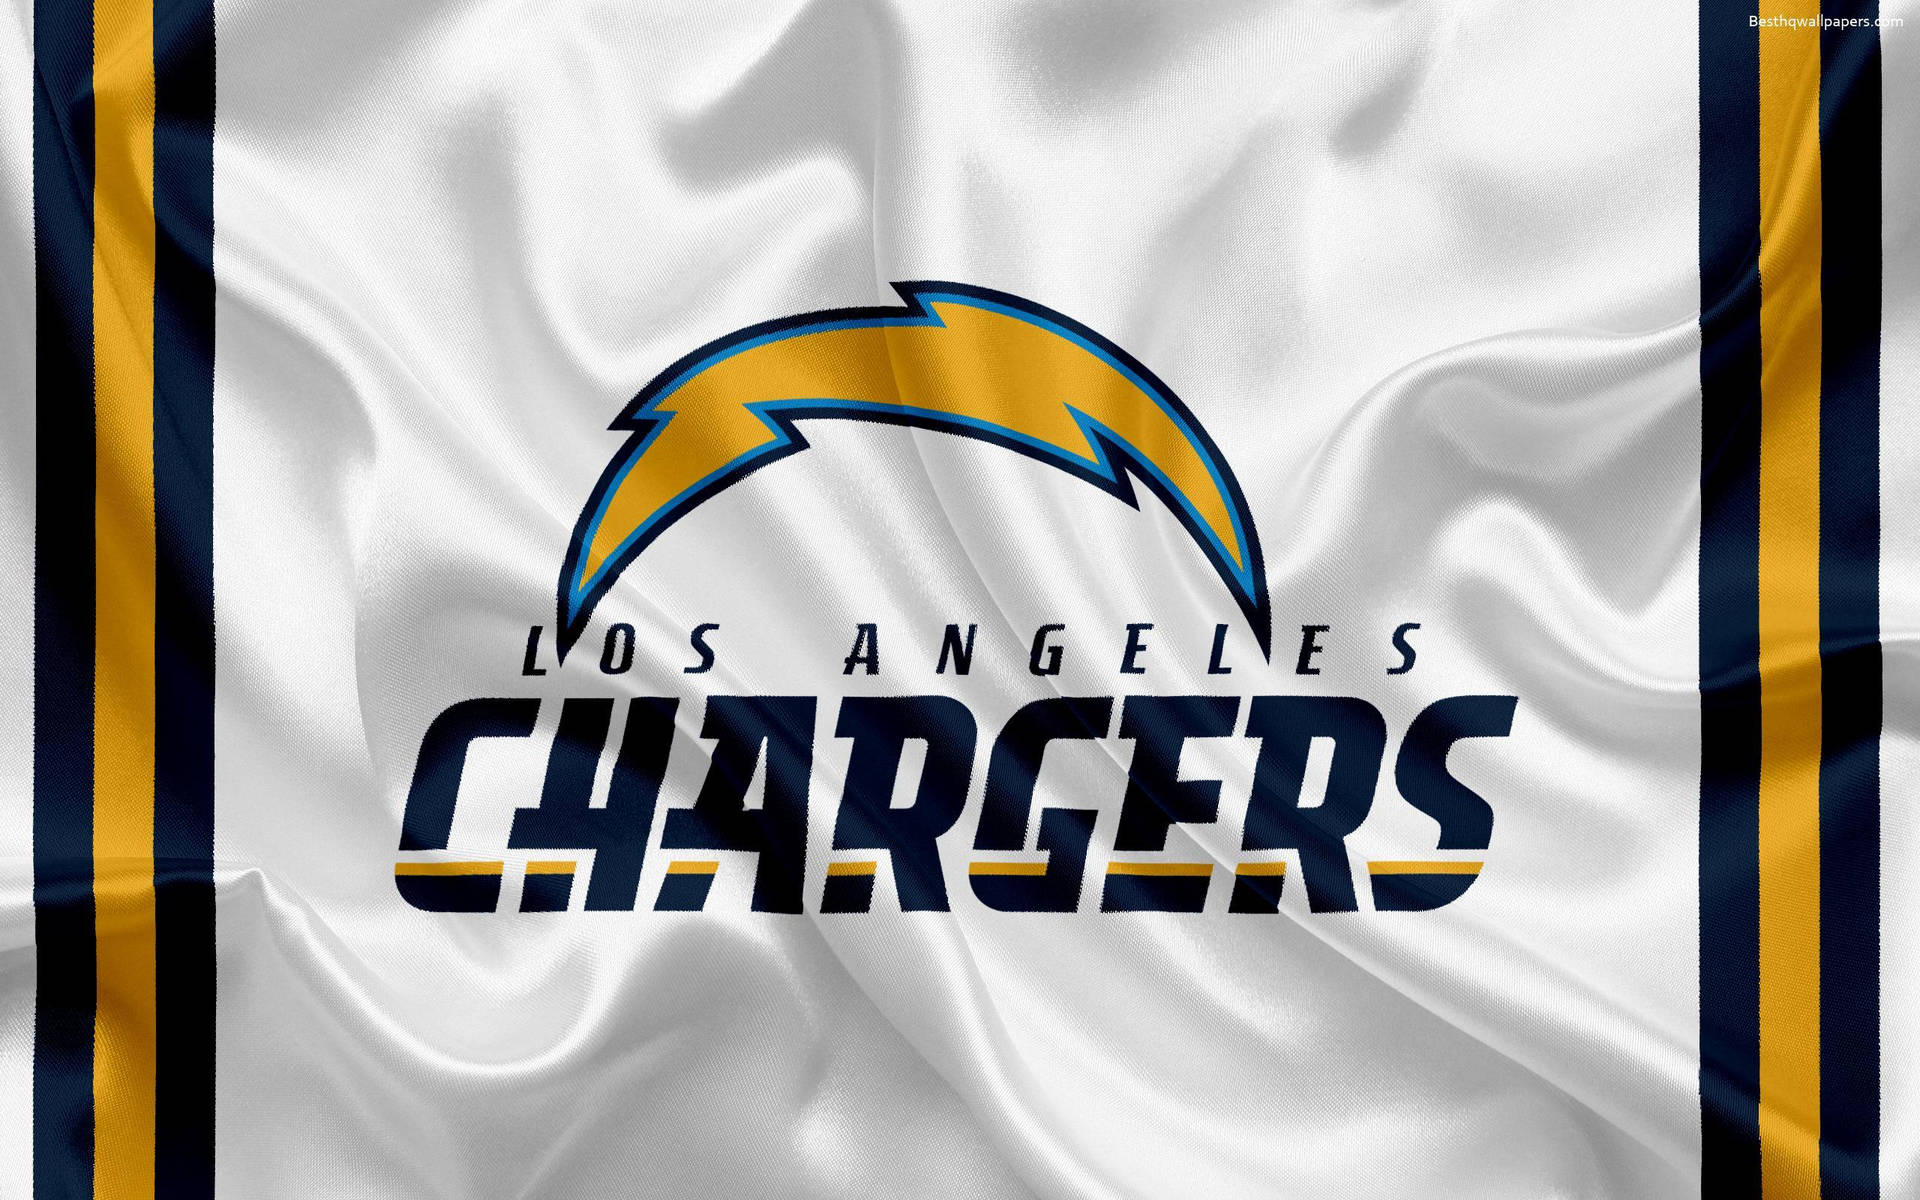 Los Angeles Chargers Wallpaper